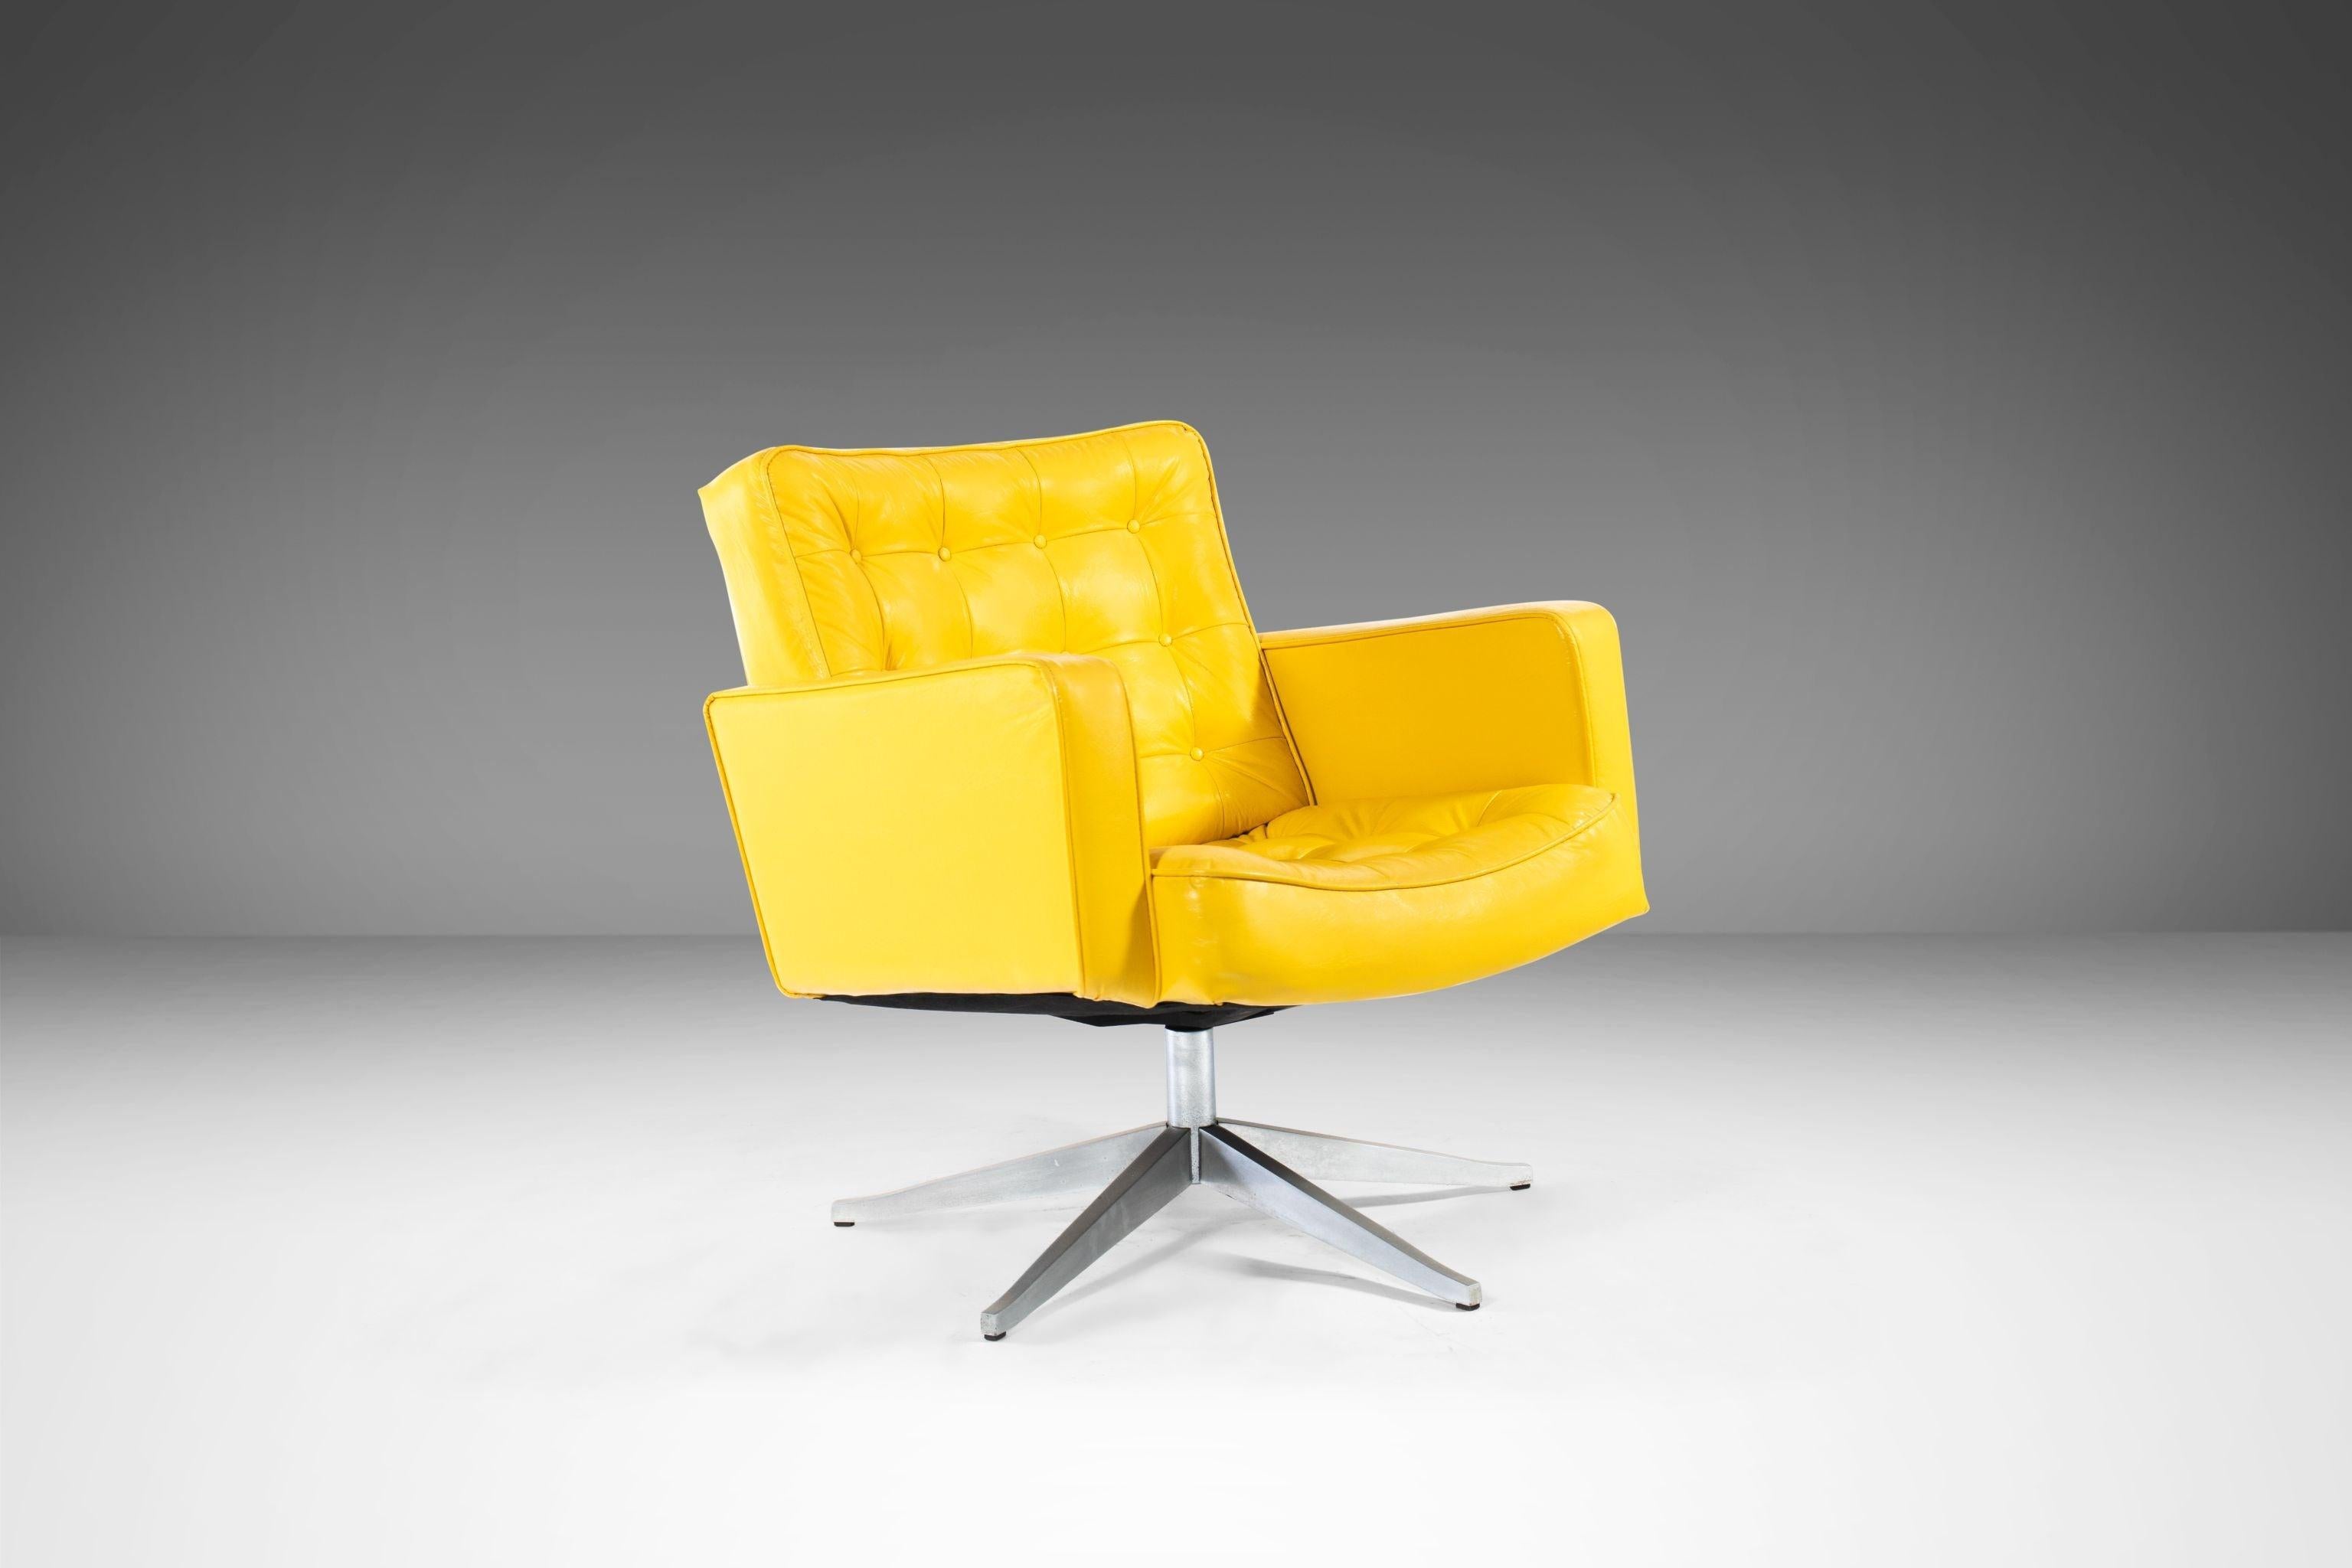 Attention designers! A gorgeous swiveling set of lounge chairs by the singular designer Cafiero for Knoll with tufted canary yellow upholstery on a five-point polished aluminum base. We've left this gorgeous set in 100% original, vintage condition